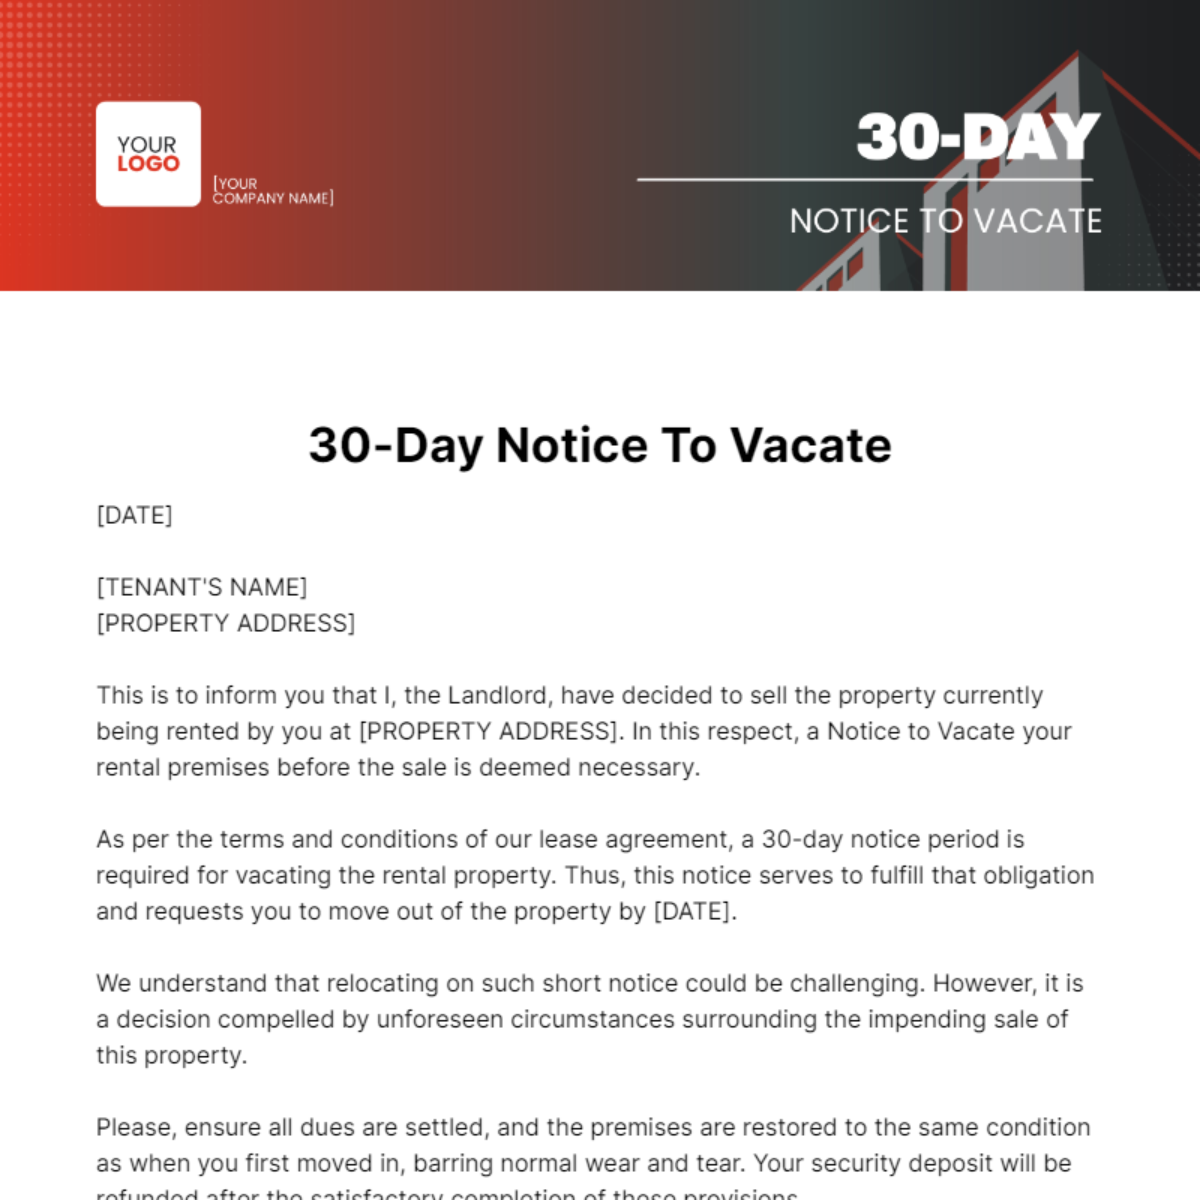 Free 30-Day Notice To Vacate Template